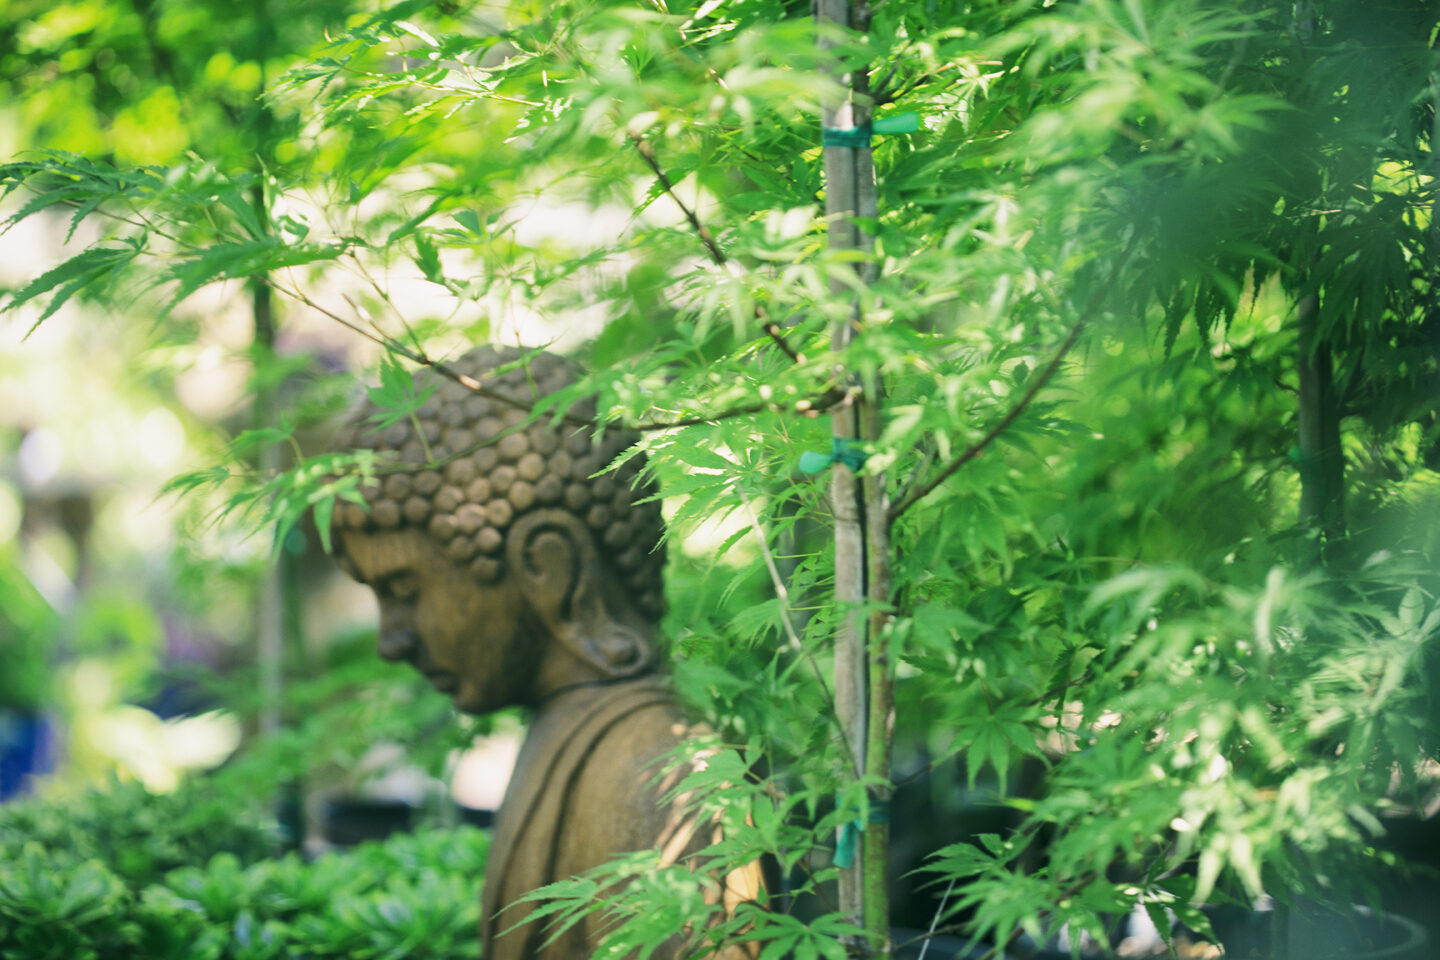 Photo of a Buddha in profile in the garden, taken by Carol Schiraldi of Carol's Little World for Chase the Light